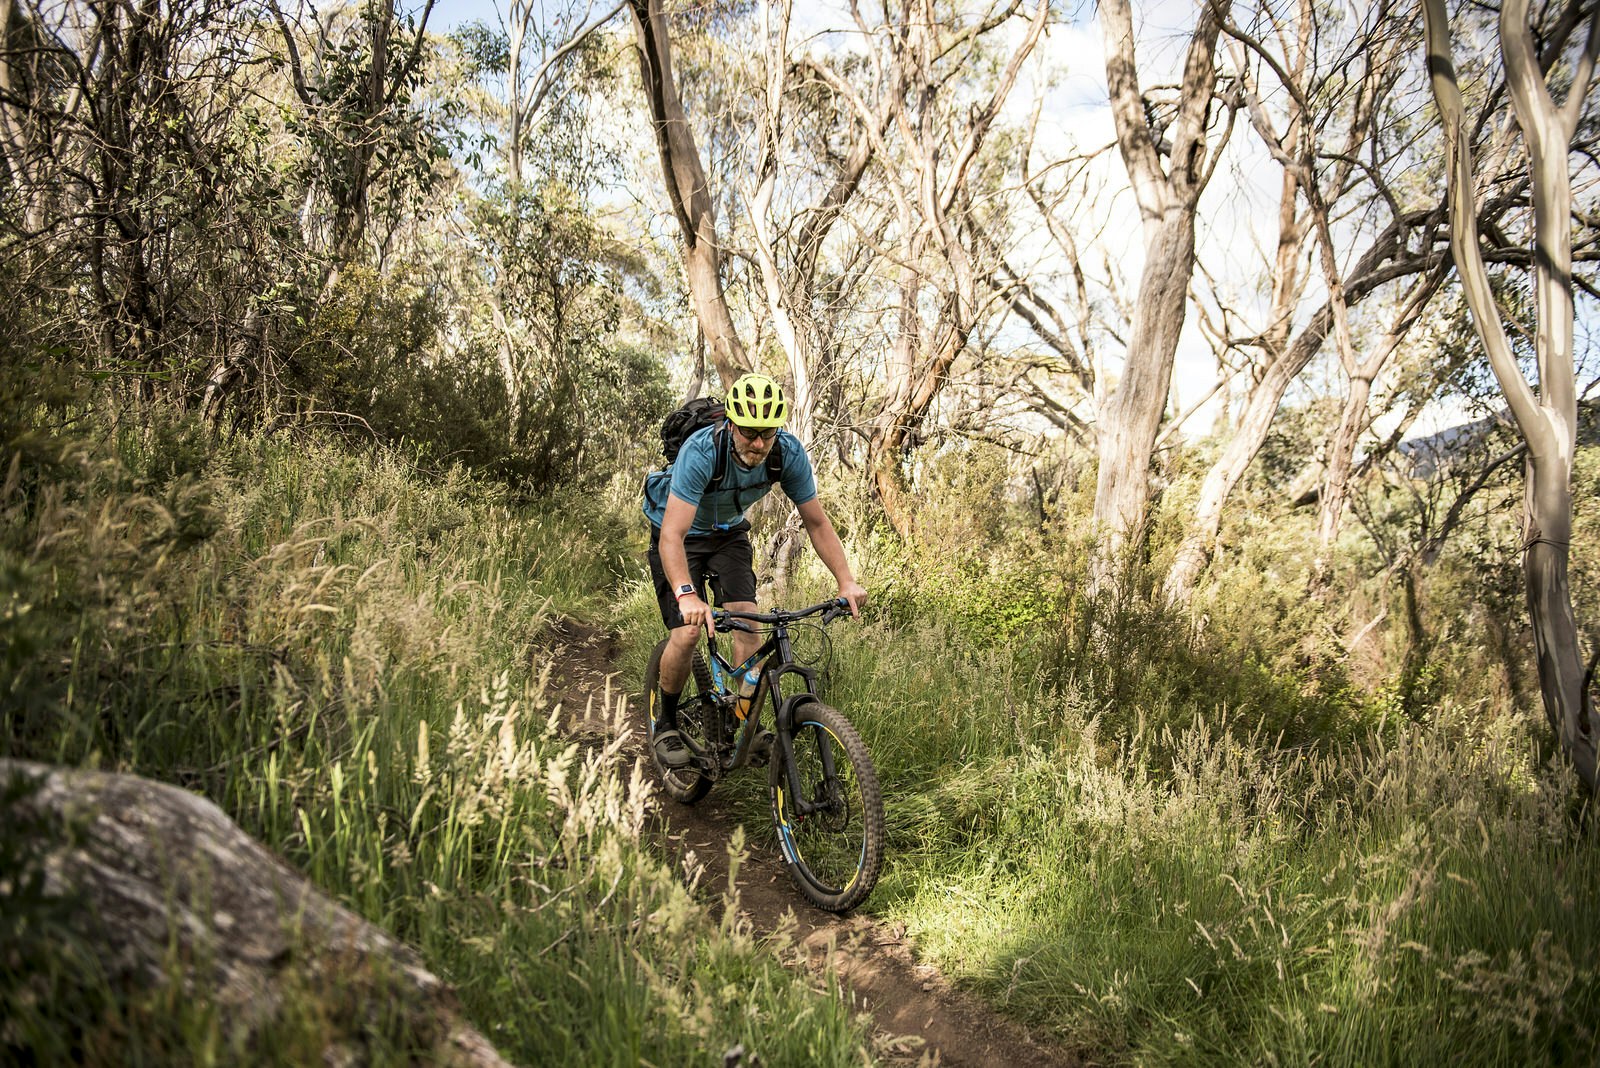 A man rides his mountain bike through different areas of Mount Kosciuszko National Park, in New South Wales, Australia; he's on a narrow track between long grasses, large rocks and tall trees.